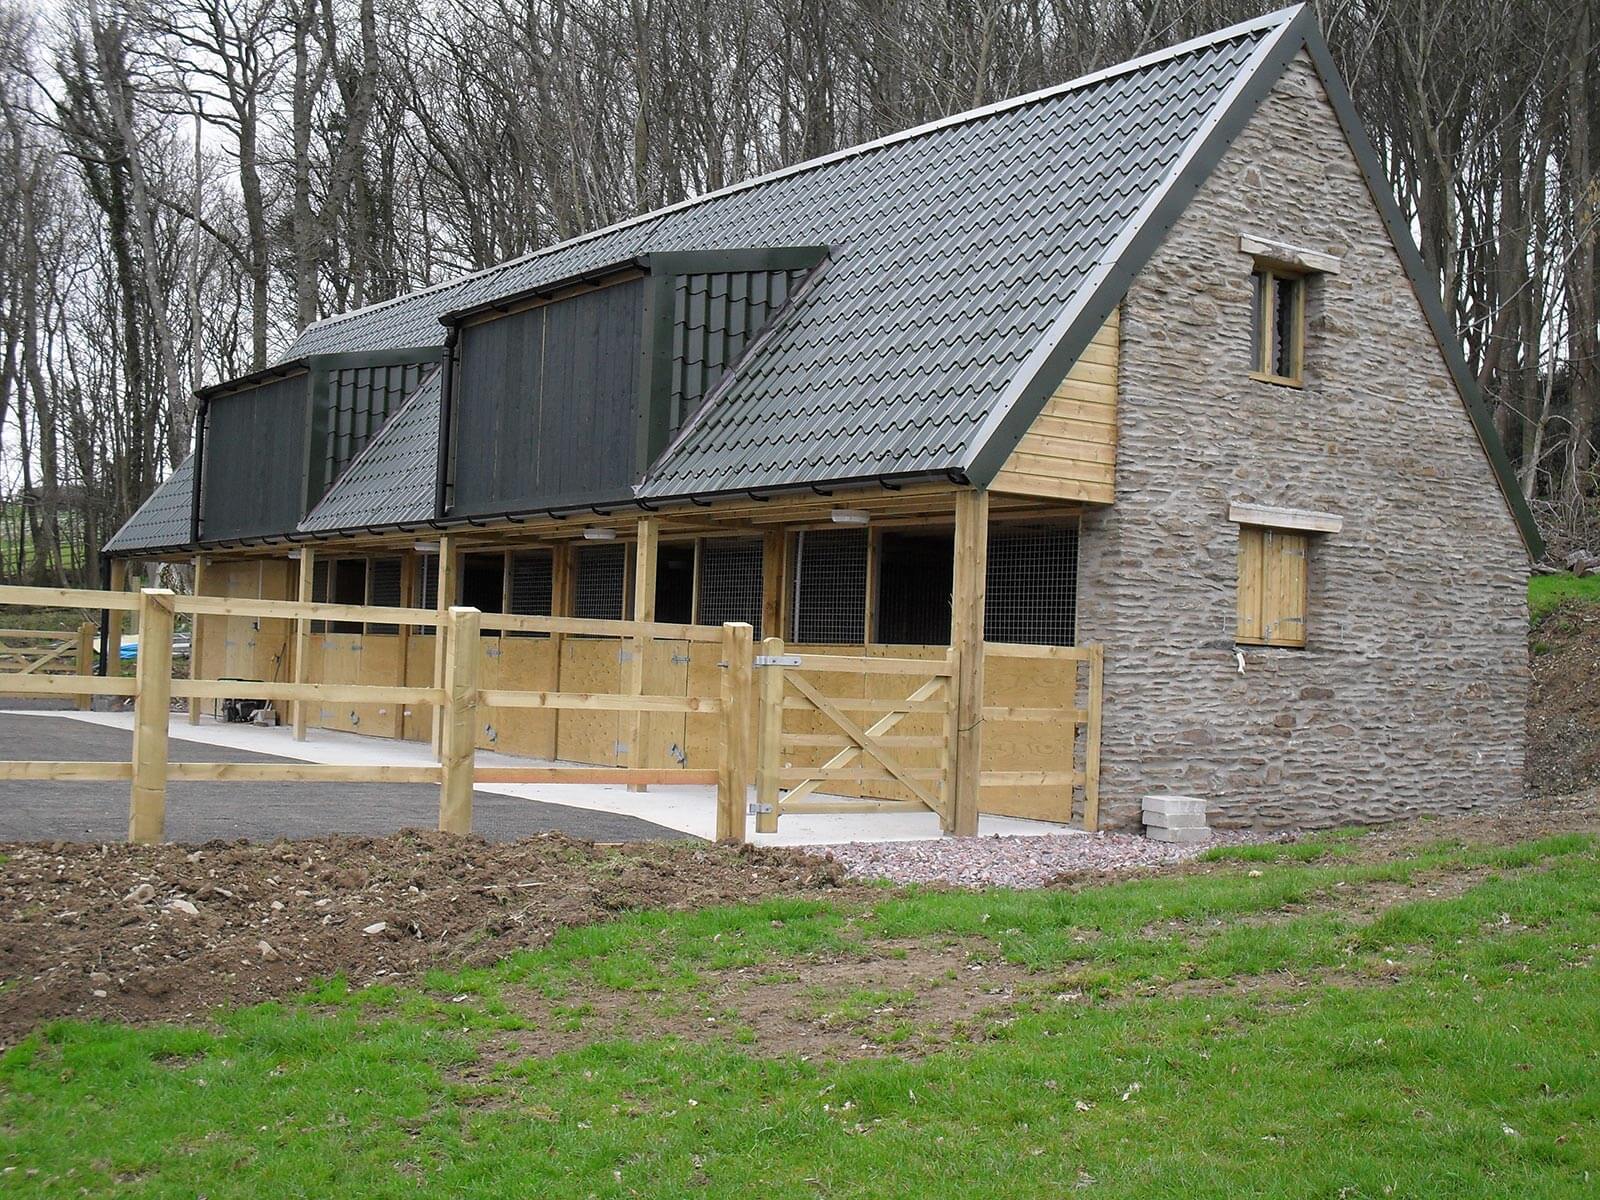 Tile form Sheeting on Stable Block